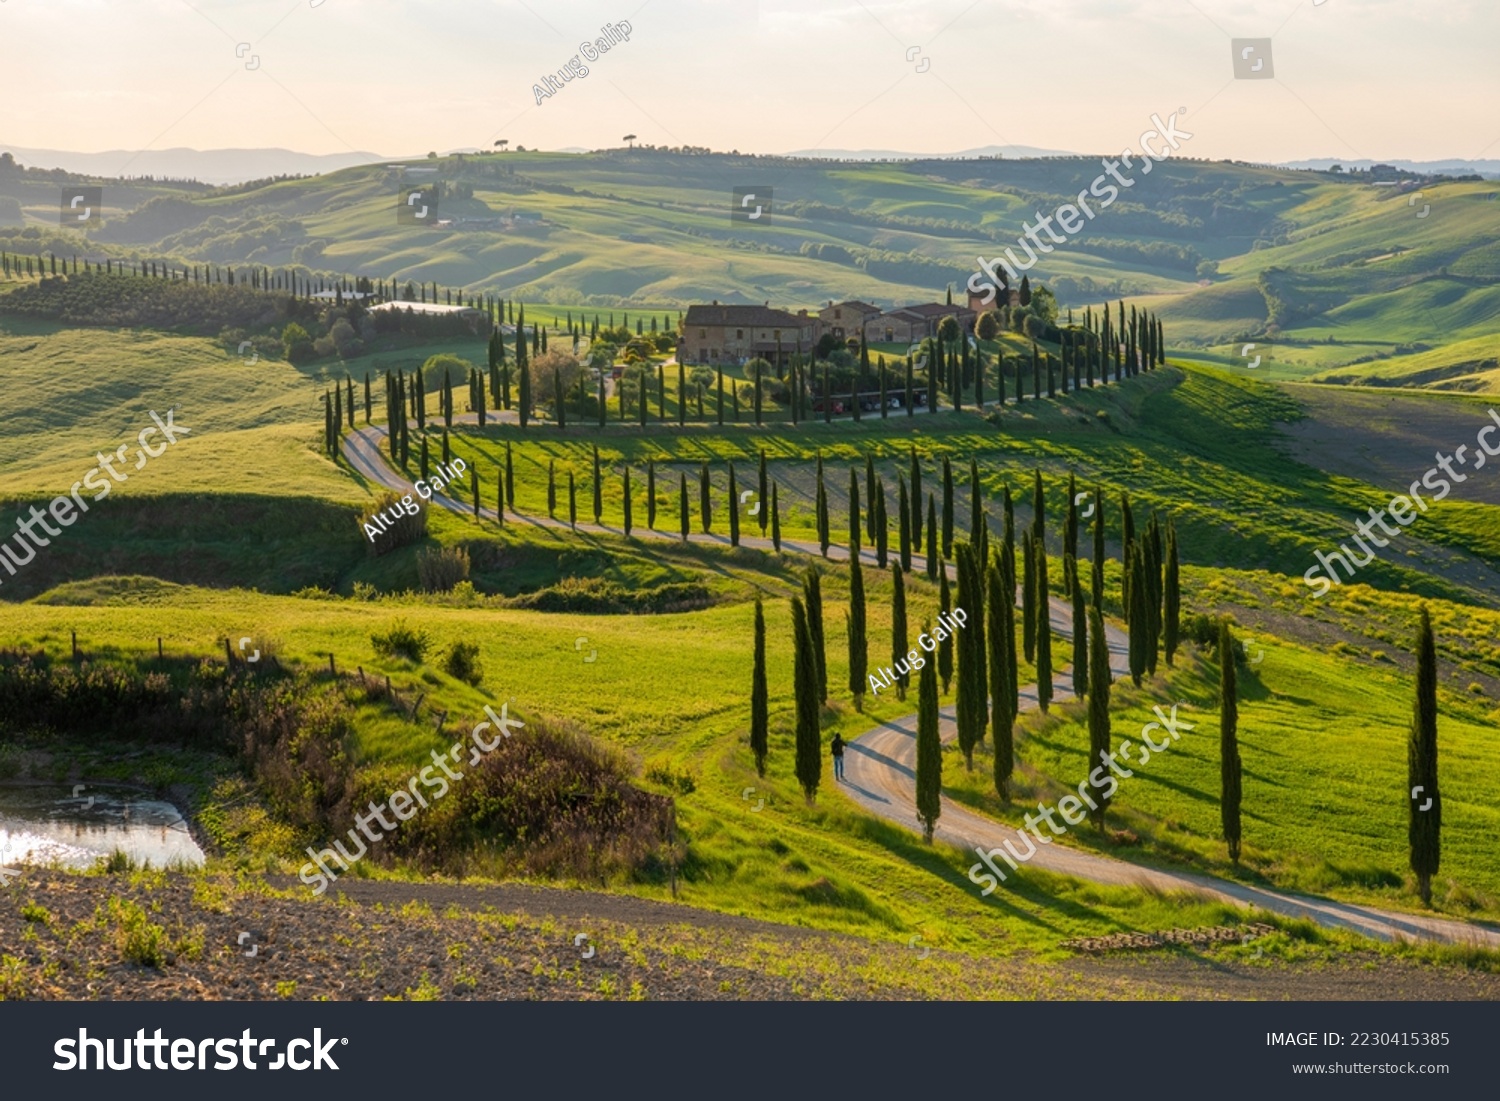 Panoramic view of a farmhouse near Asciano with Val d'Orcia hills in the background. #2230415385